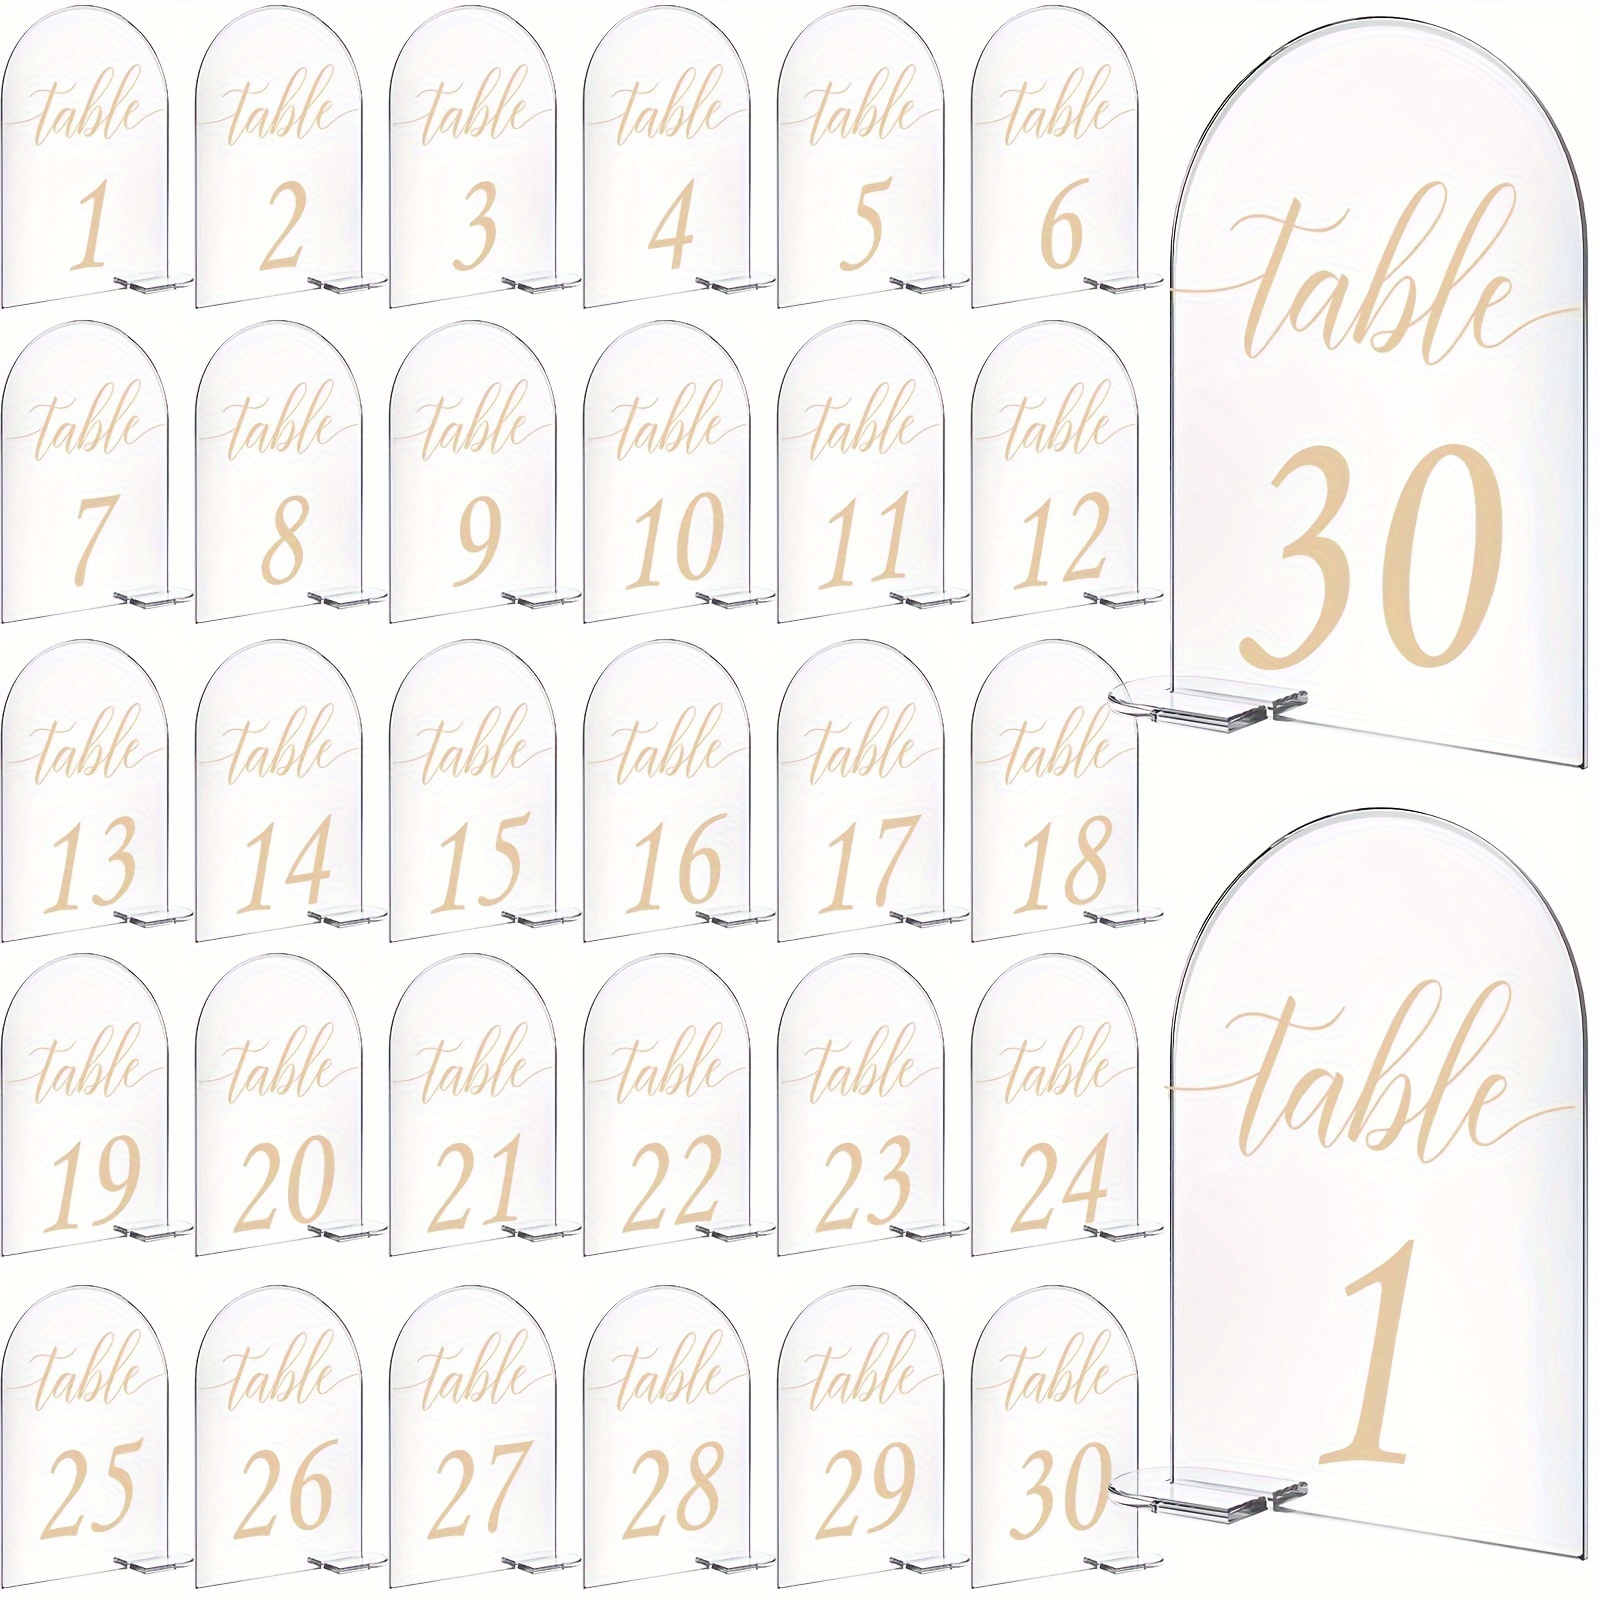 

30 Sets, 4 X 6 Inch Arch Acrylic Sign Golden Printed 1-30 Table Signs With Stands Calligraphy Clear Table Number Display Stand For Wedding Reception Event Party Restaurant Centerpieces Decor